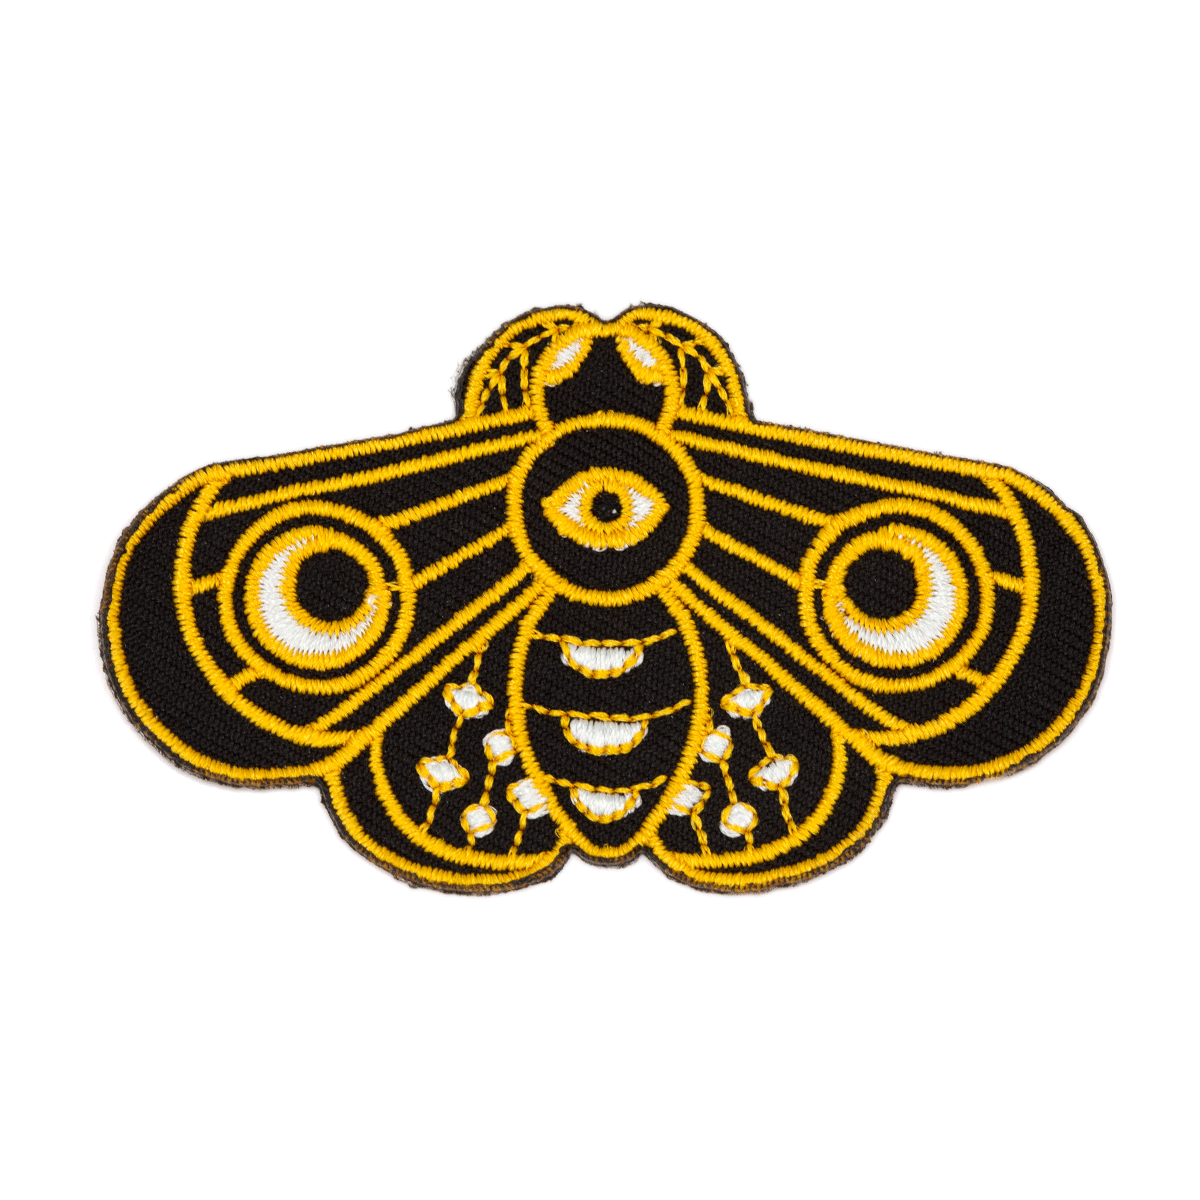 "Lunar Moth" black, yellow, and white moth embroidered patch with witchy crescent moon and eye motif